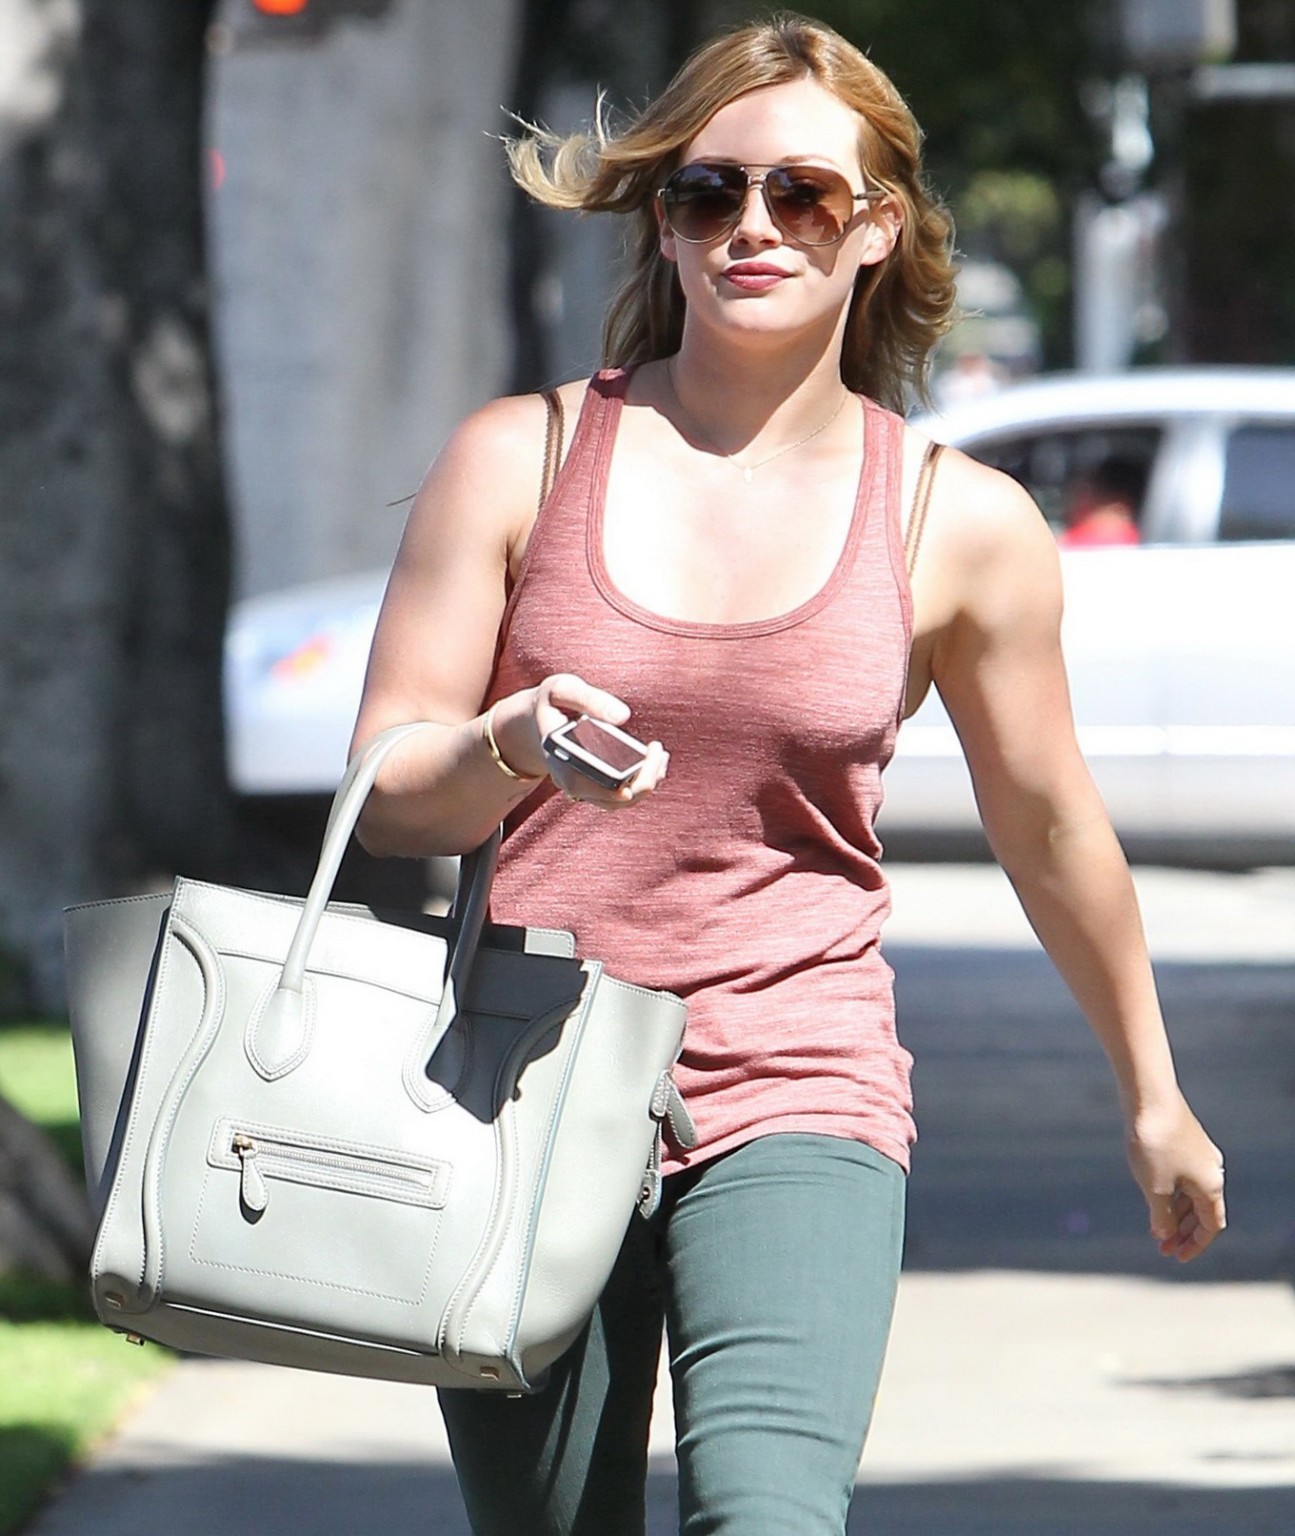 Hilary Duff wearing skimpy red top and tight jeans out in Beverly Hills #75234541